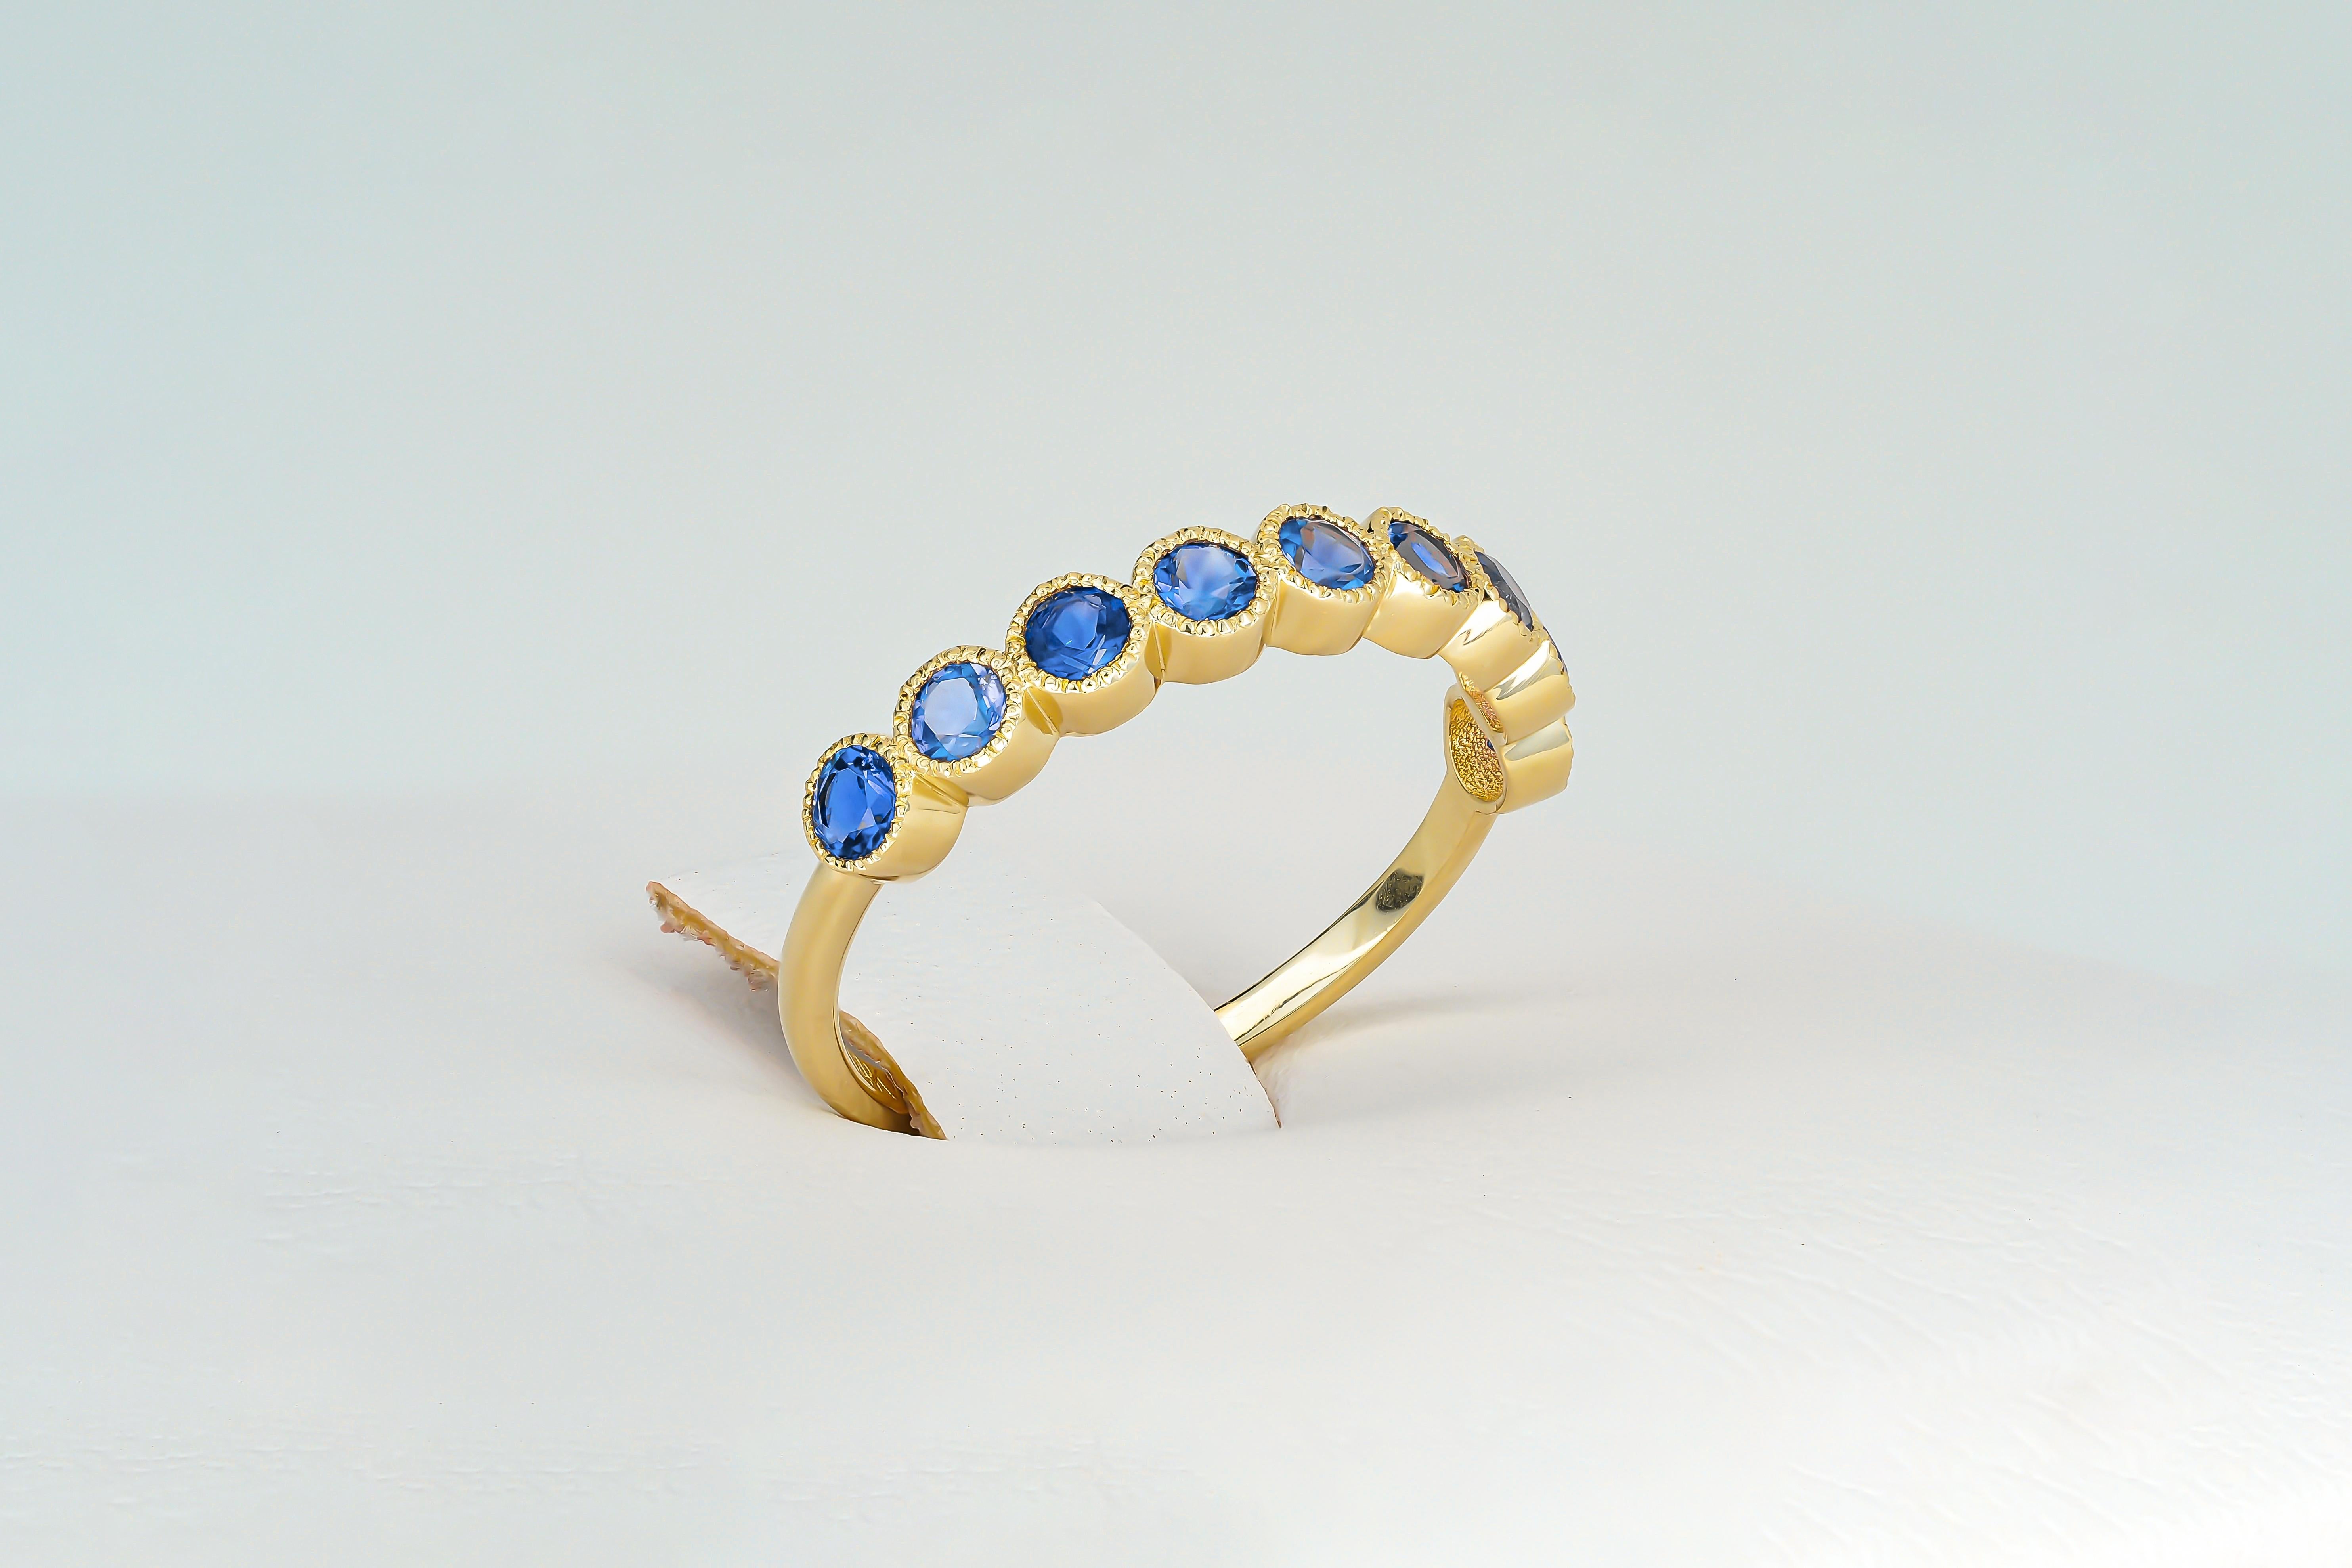 Blue gem half eternity 14k gold ring.
Lab sapphire semi eternity ring. Round blue gemstone gold ring. 2.5 mm lab blue sapphire ring.

Metal: 14k gold
Weight: 1.8 gr depends from size

Gemstones:
Lab sapphires, blue color, round cut, 2.5 mm size.